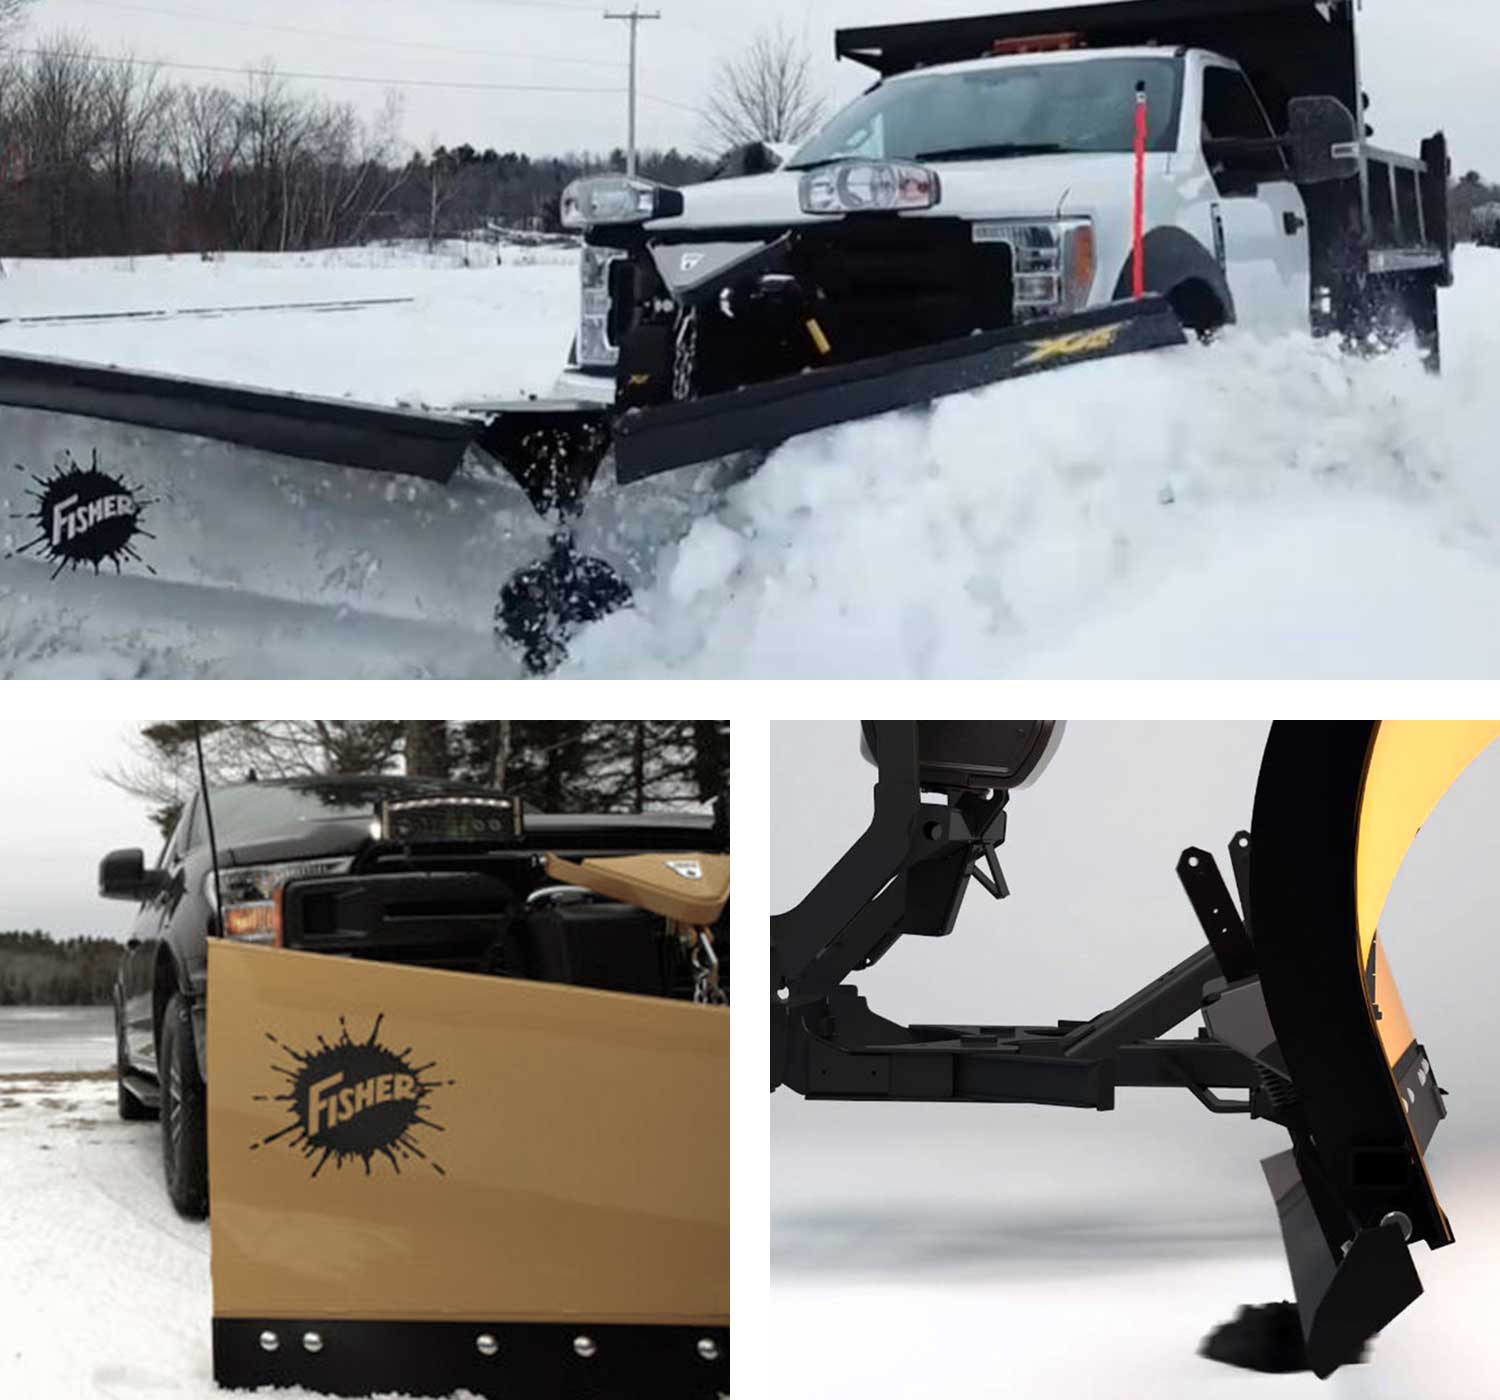 How To Choose The Right Snow Removal Machine